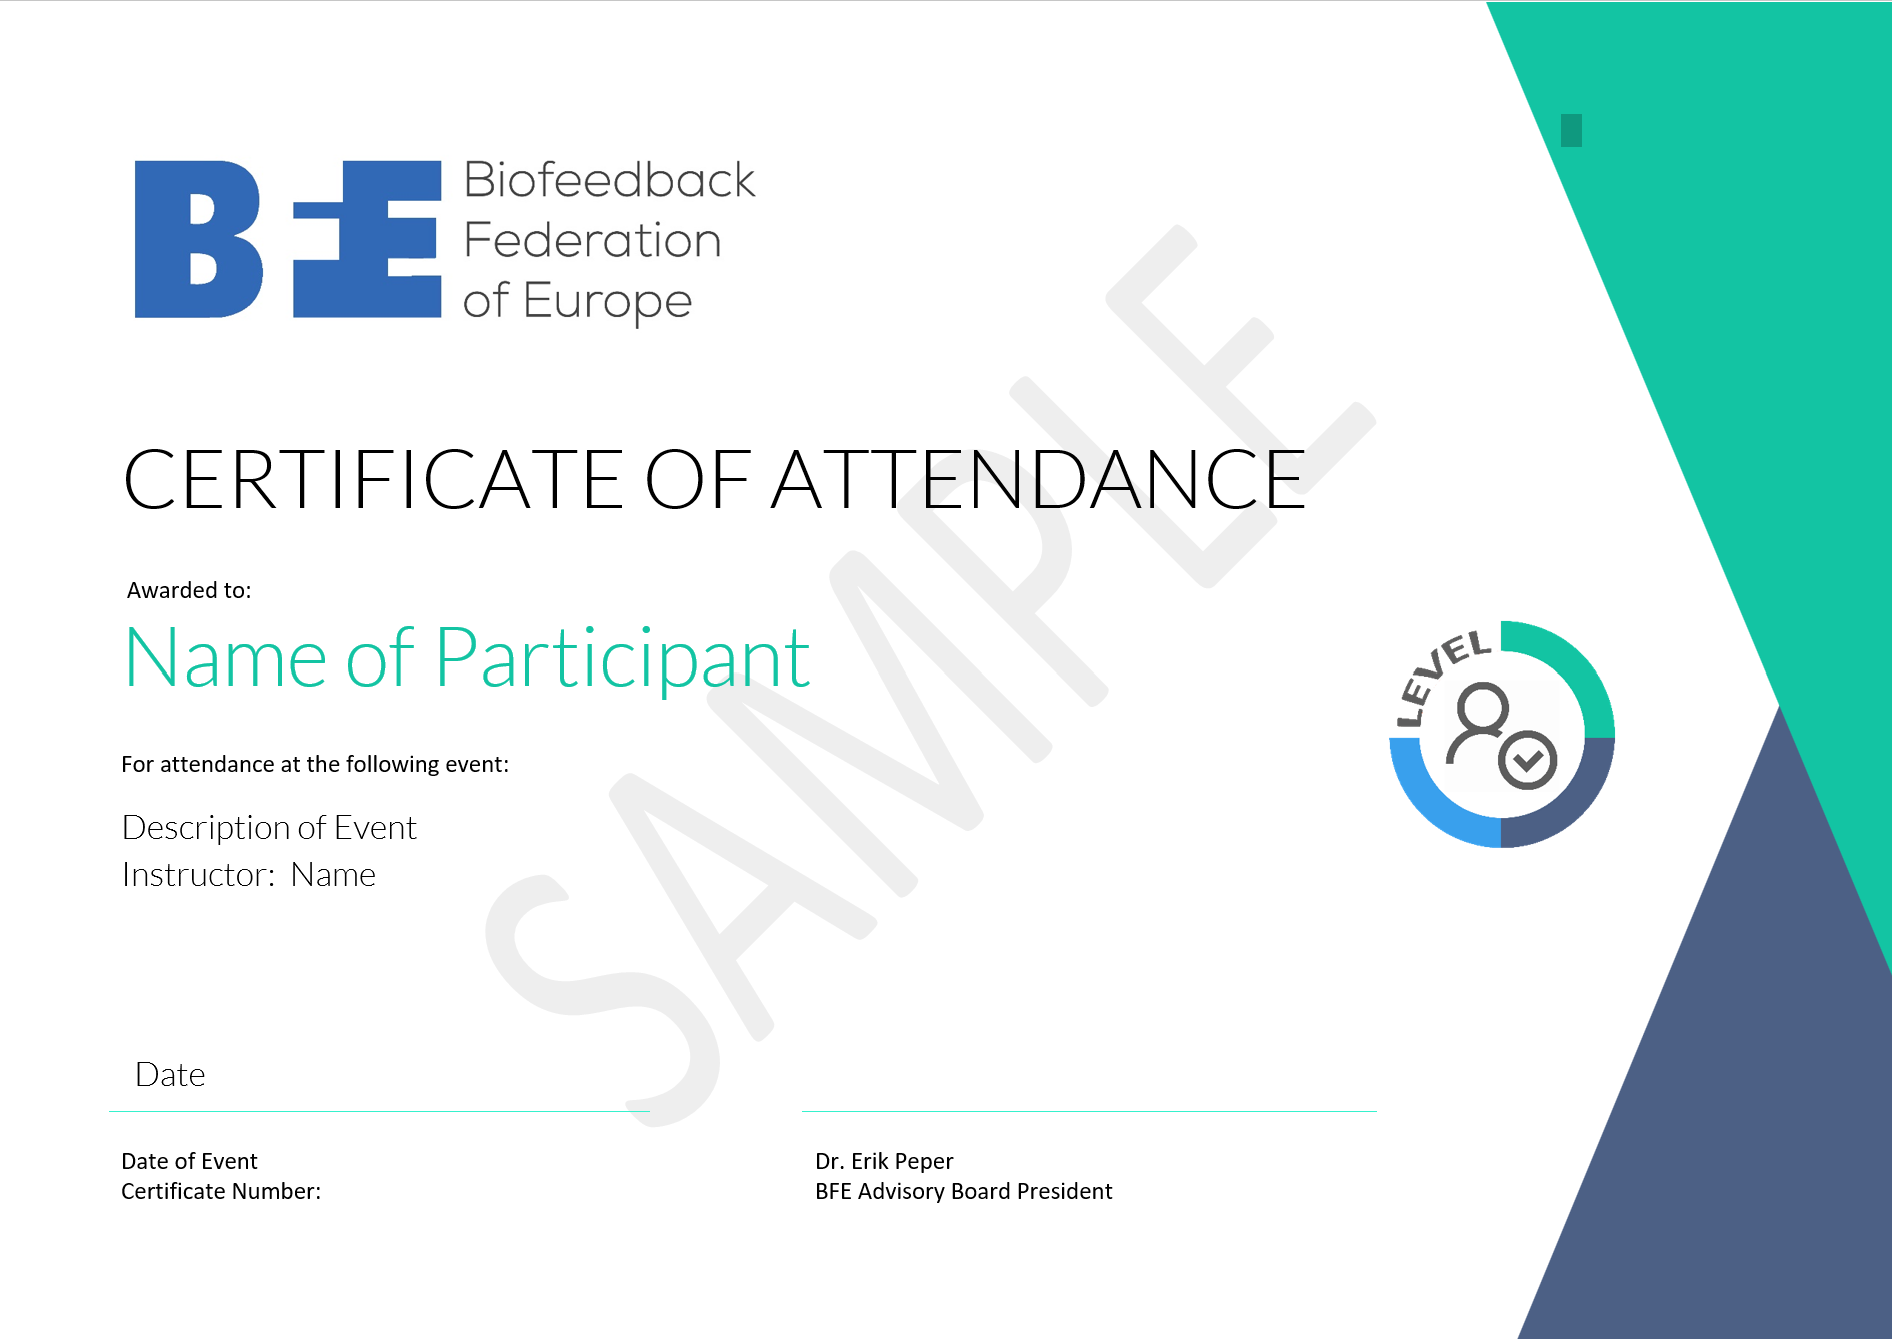 BFE CERTIFICATE OF ATTENDANCE